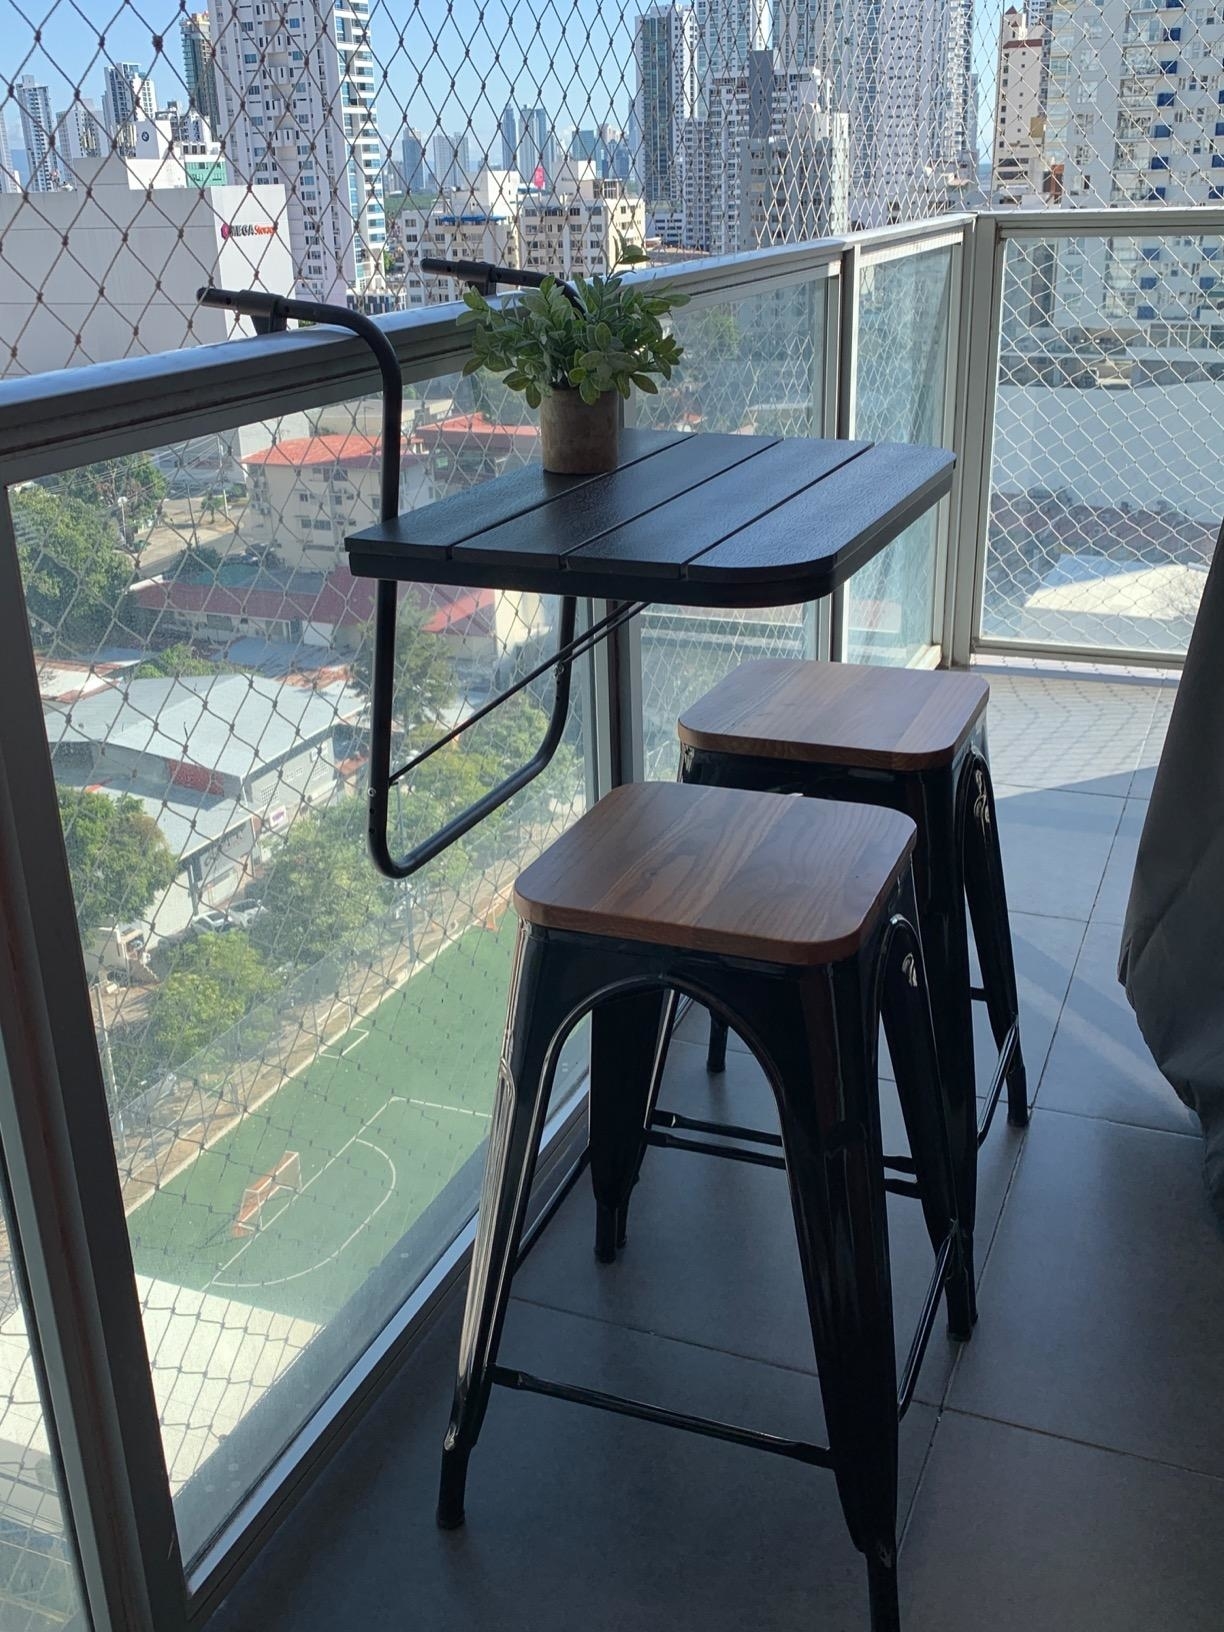 Small balcony with a black folding table, two wooden stools, and a potted plant, overlooking a cityscape